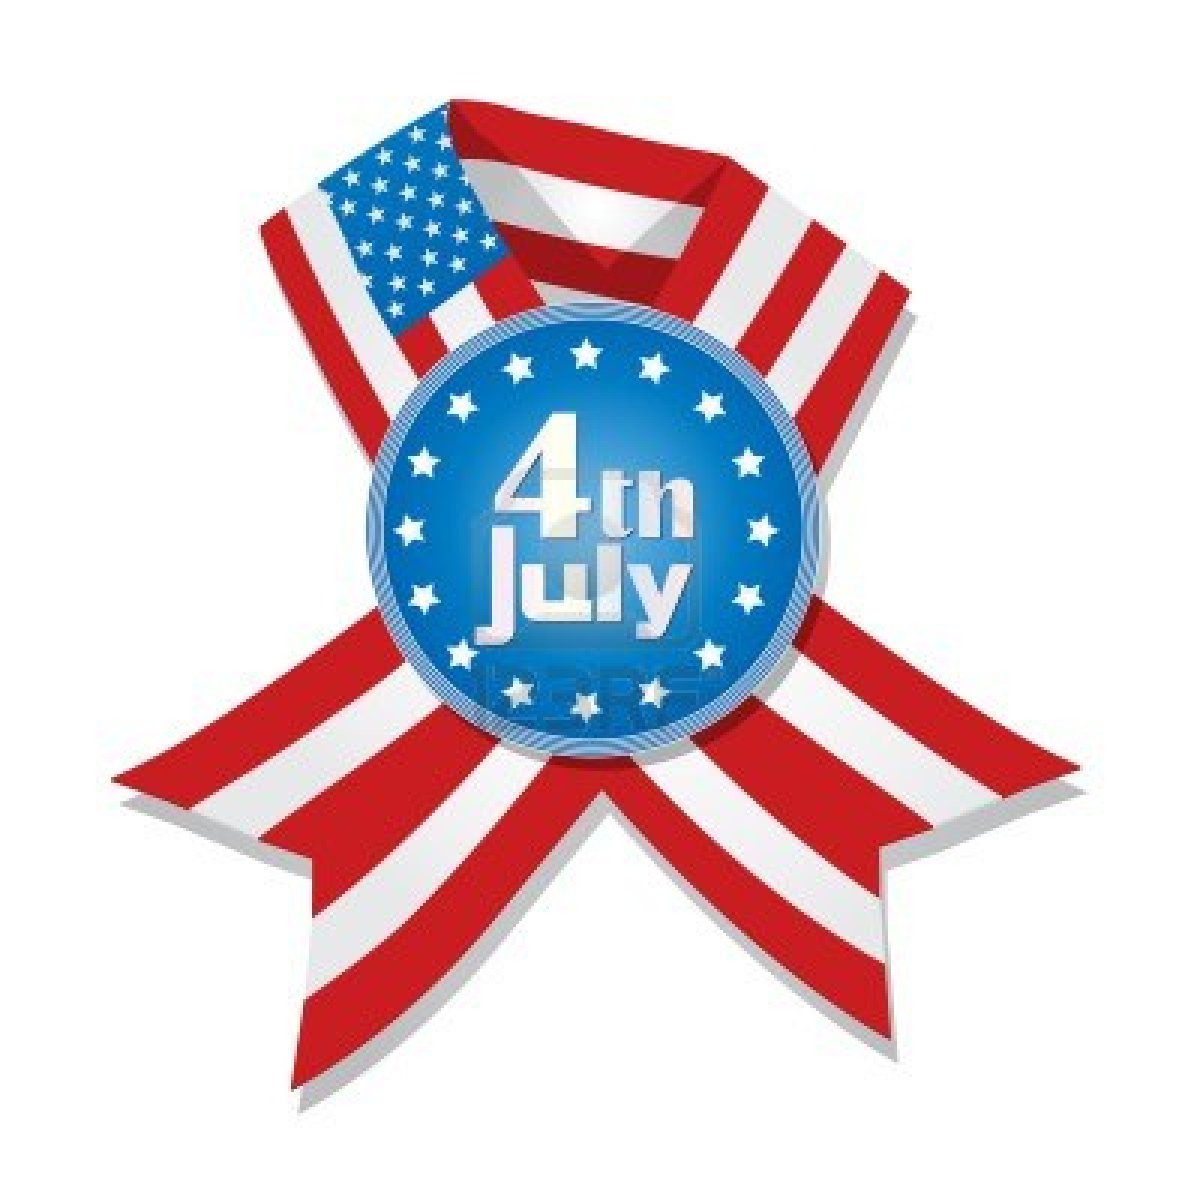 13654944 4th Of July Badge And Ribbon With Flag Of United States Of